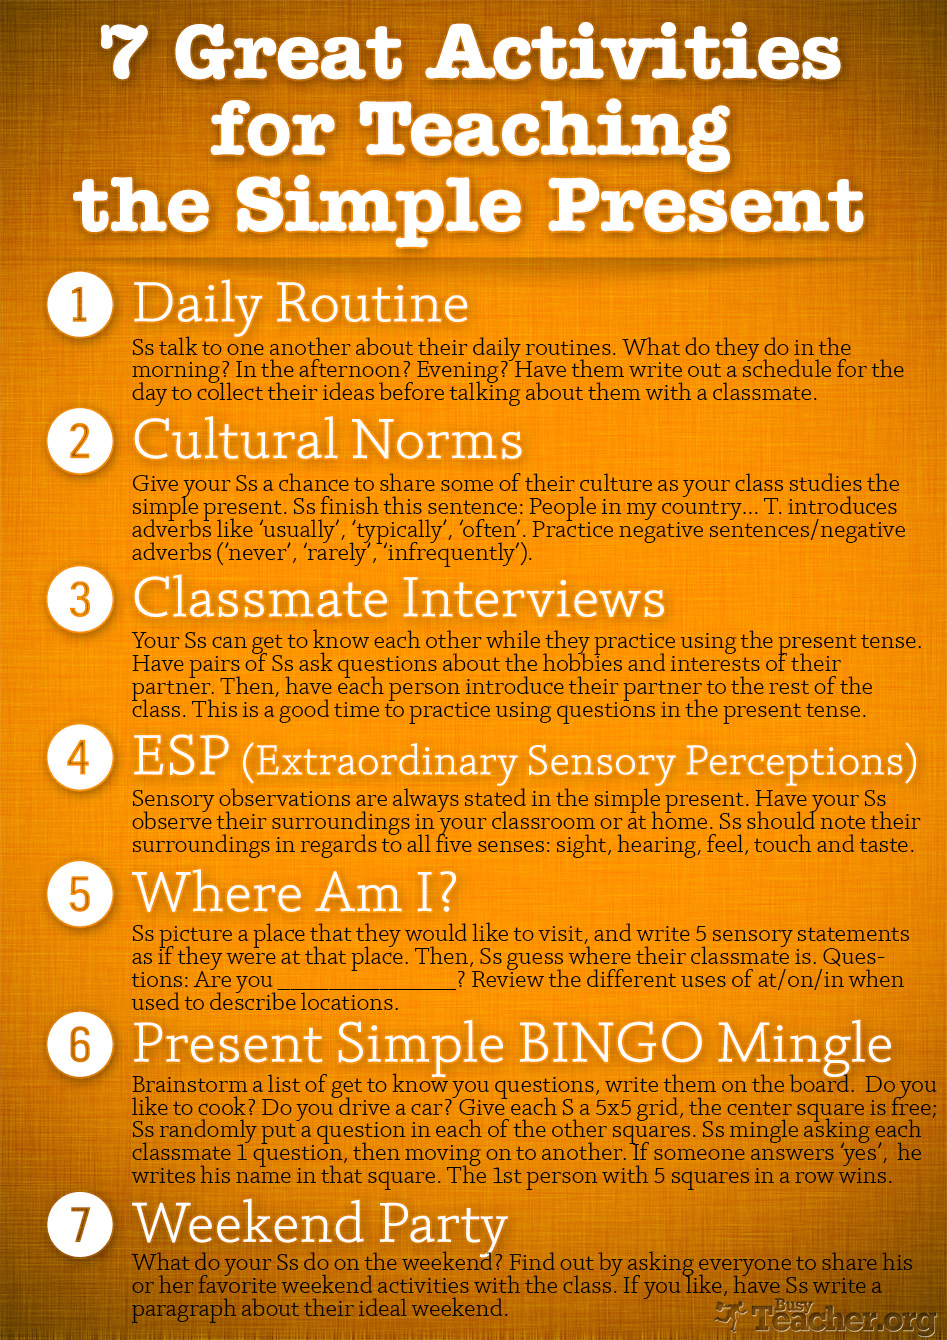 7 Great Activities to Teach the Simple Present: Poster